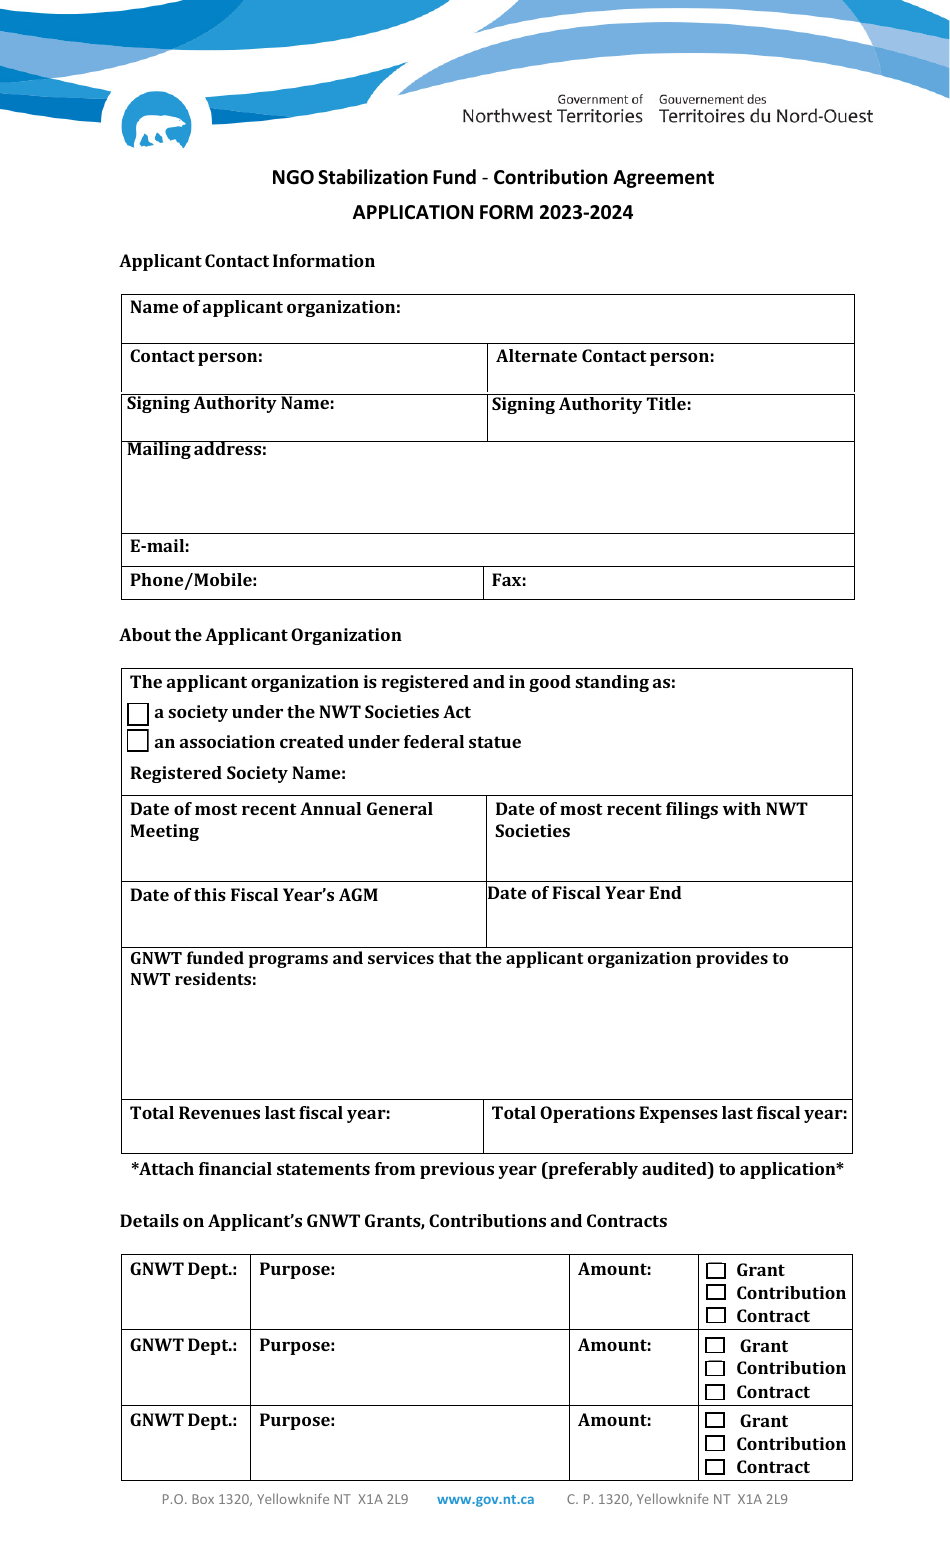 Application Form - Ngo Stabilization Fund - Contribution Agreement - Northwest Territories, Canada, Page 1